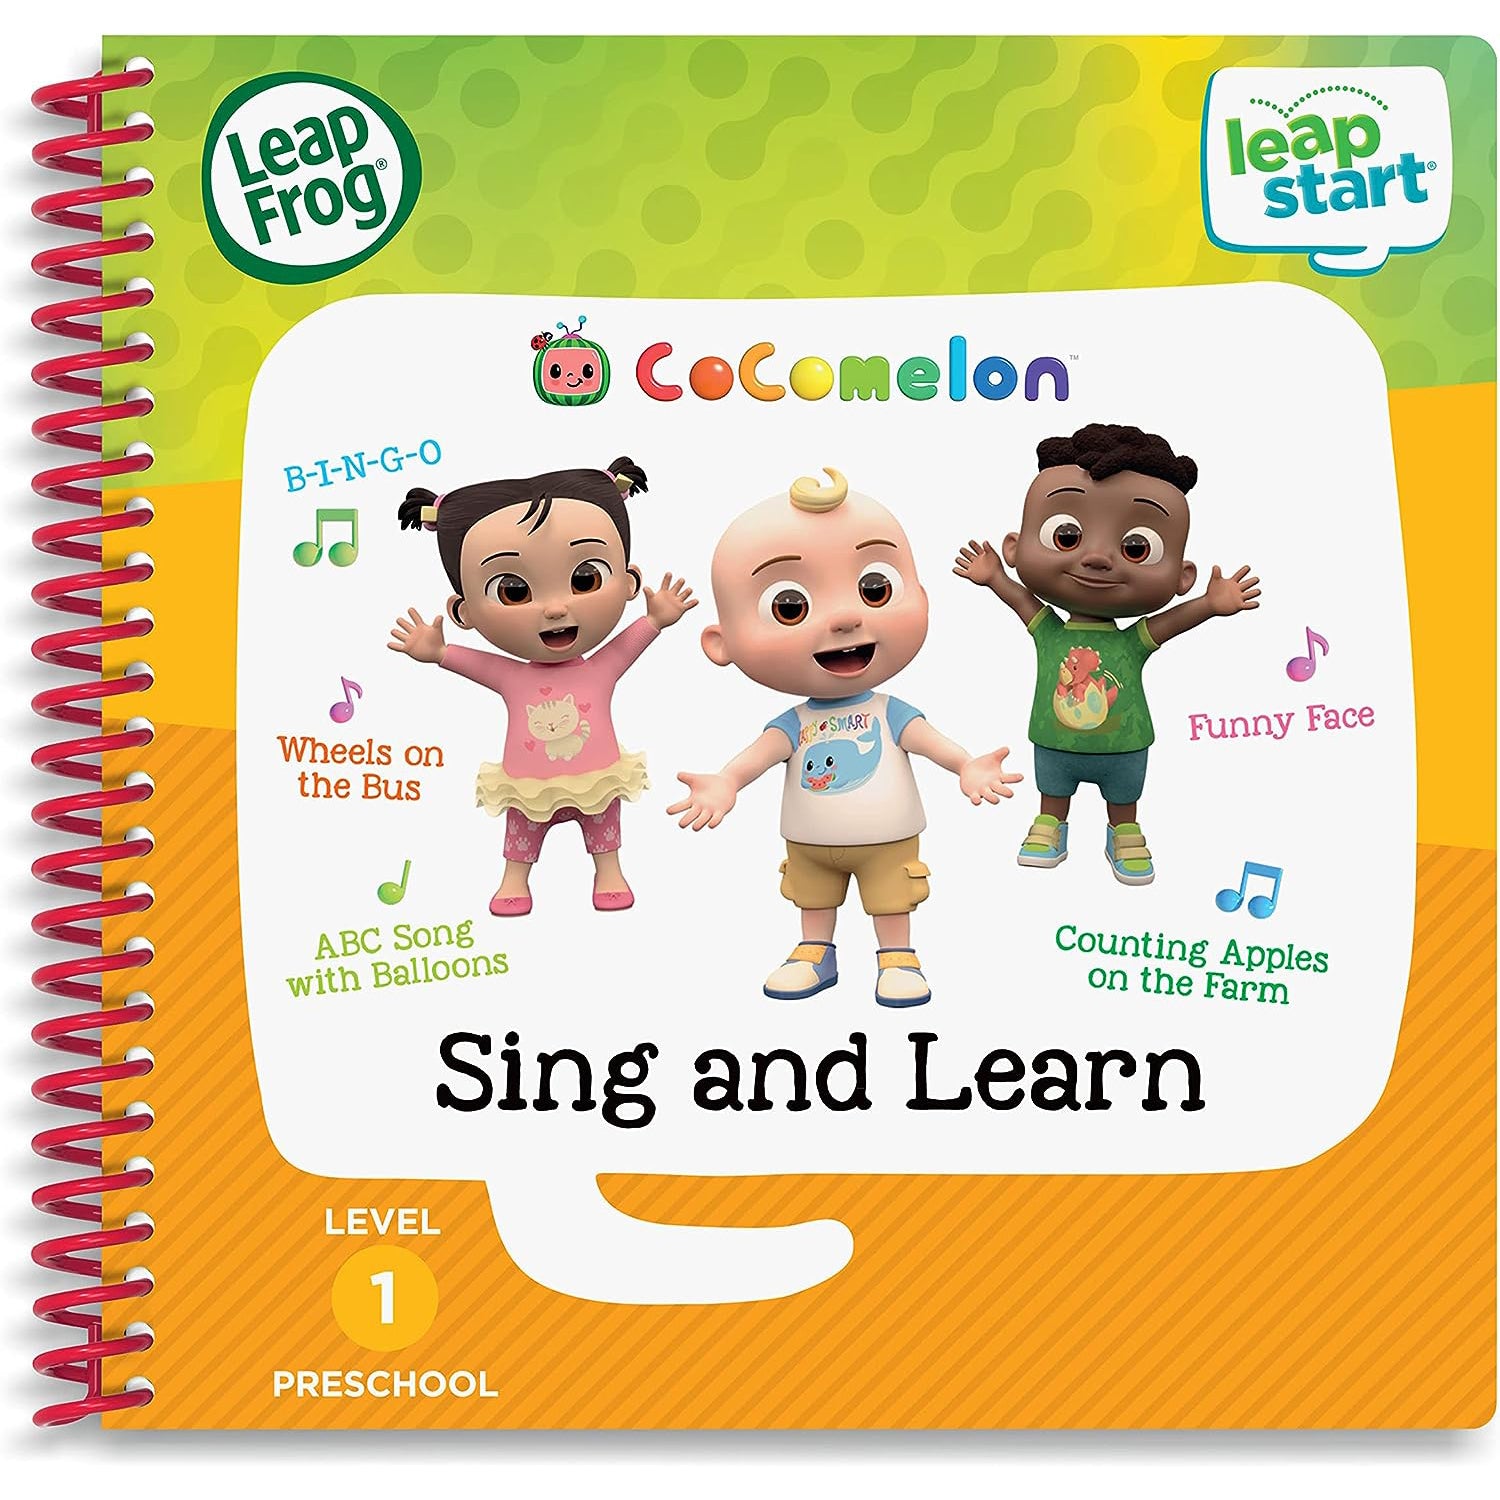 LeapFrog LeapStart Preschool (Level 1) CoComelon Sing and Learn Activity Book (English Version)